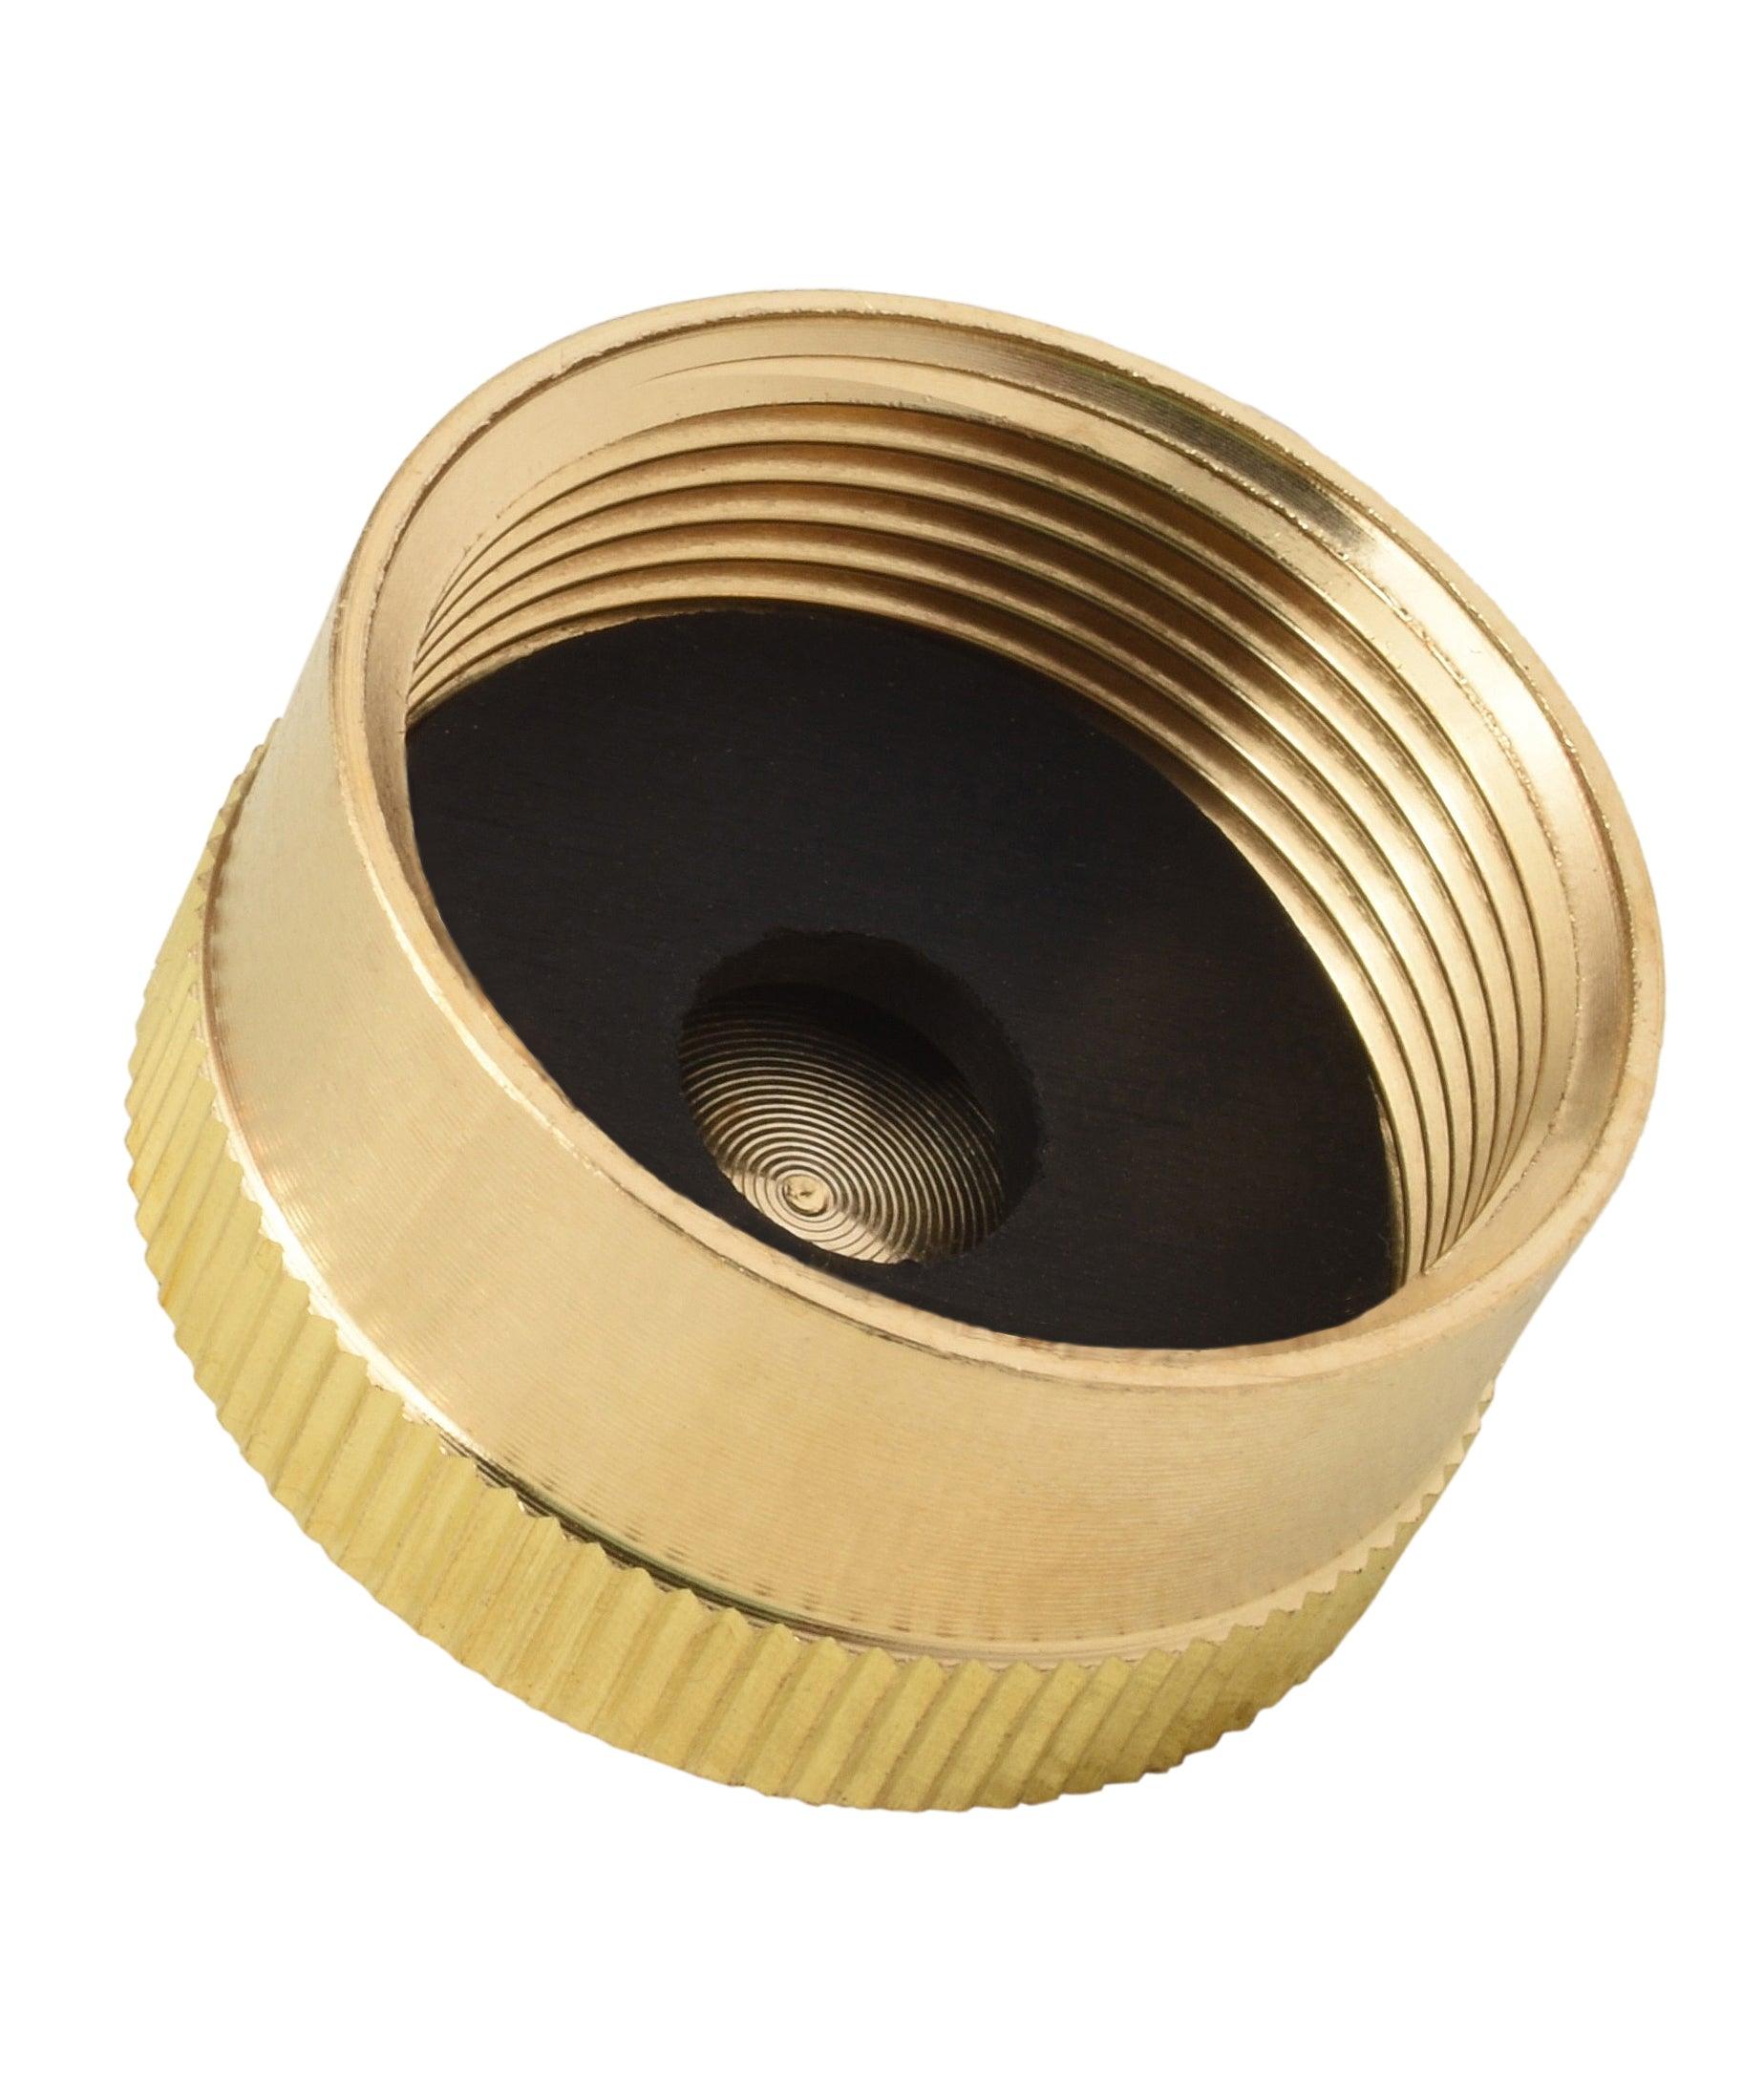 Flame King 1lb Cylinder Brass Caps 4 pack - Flame King